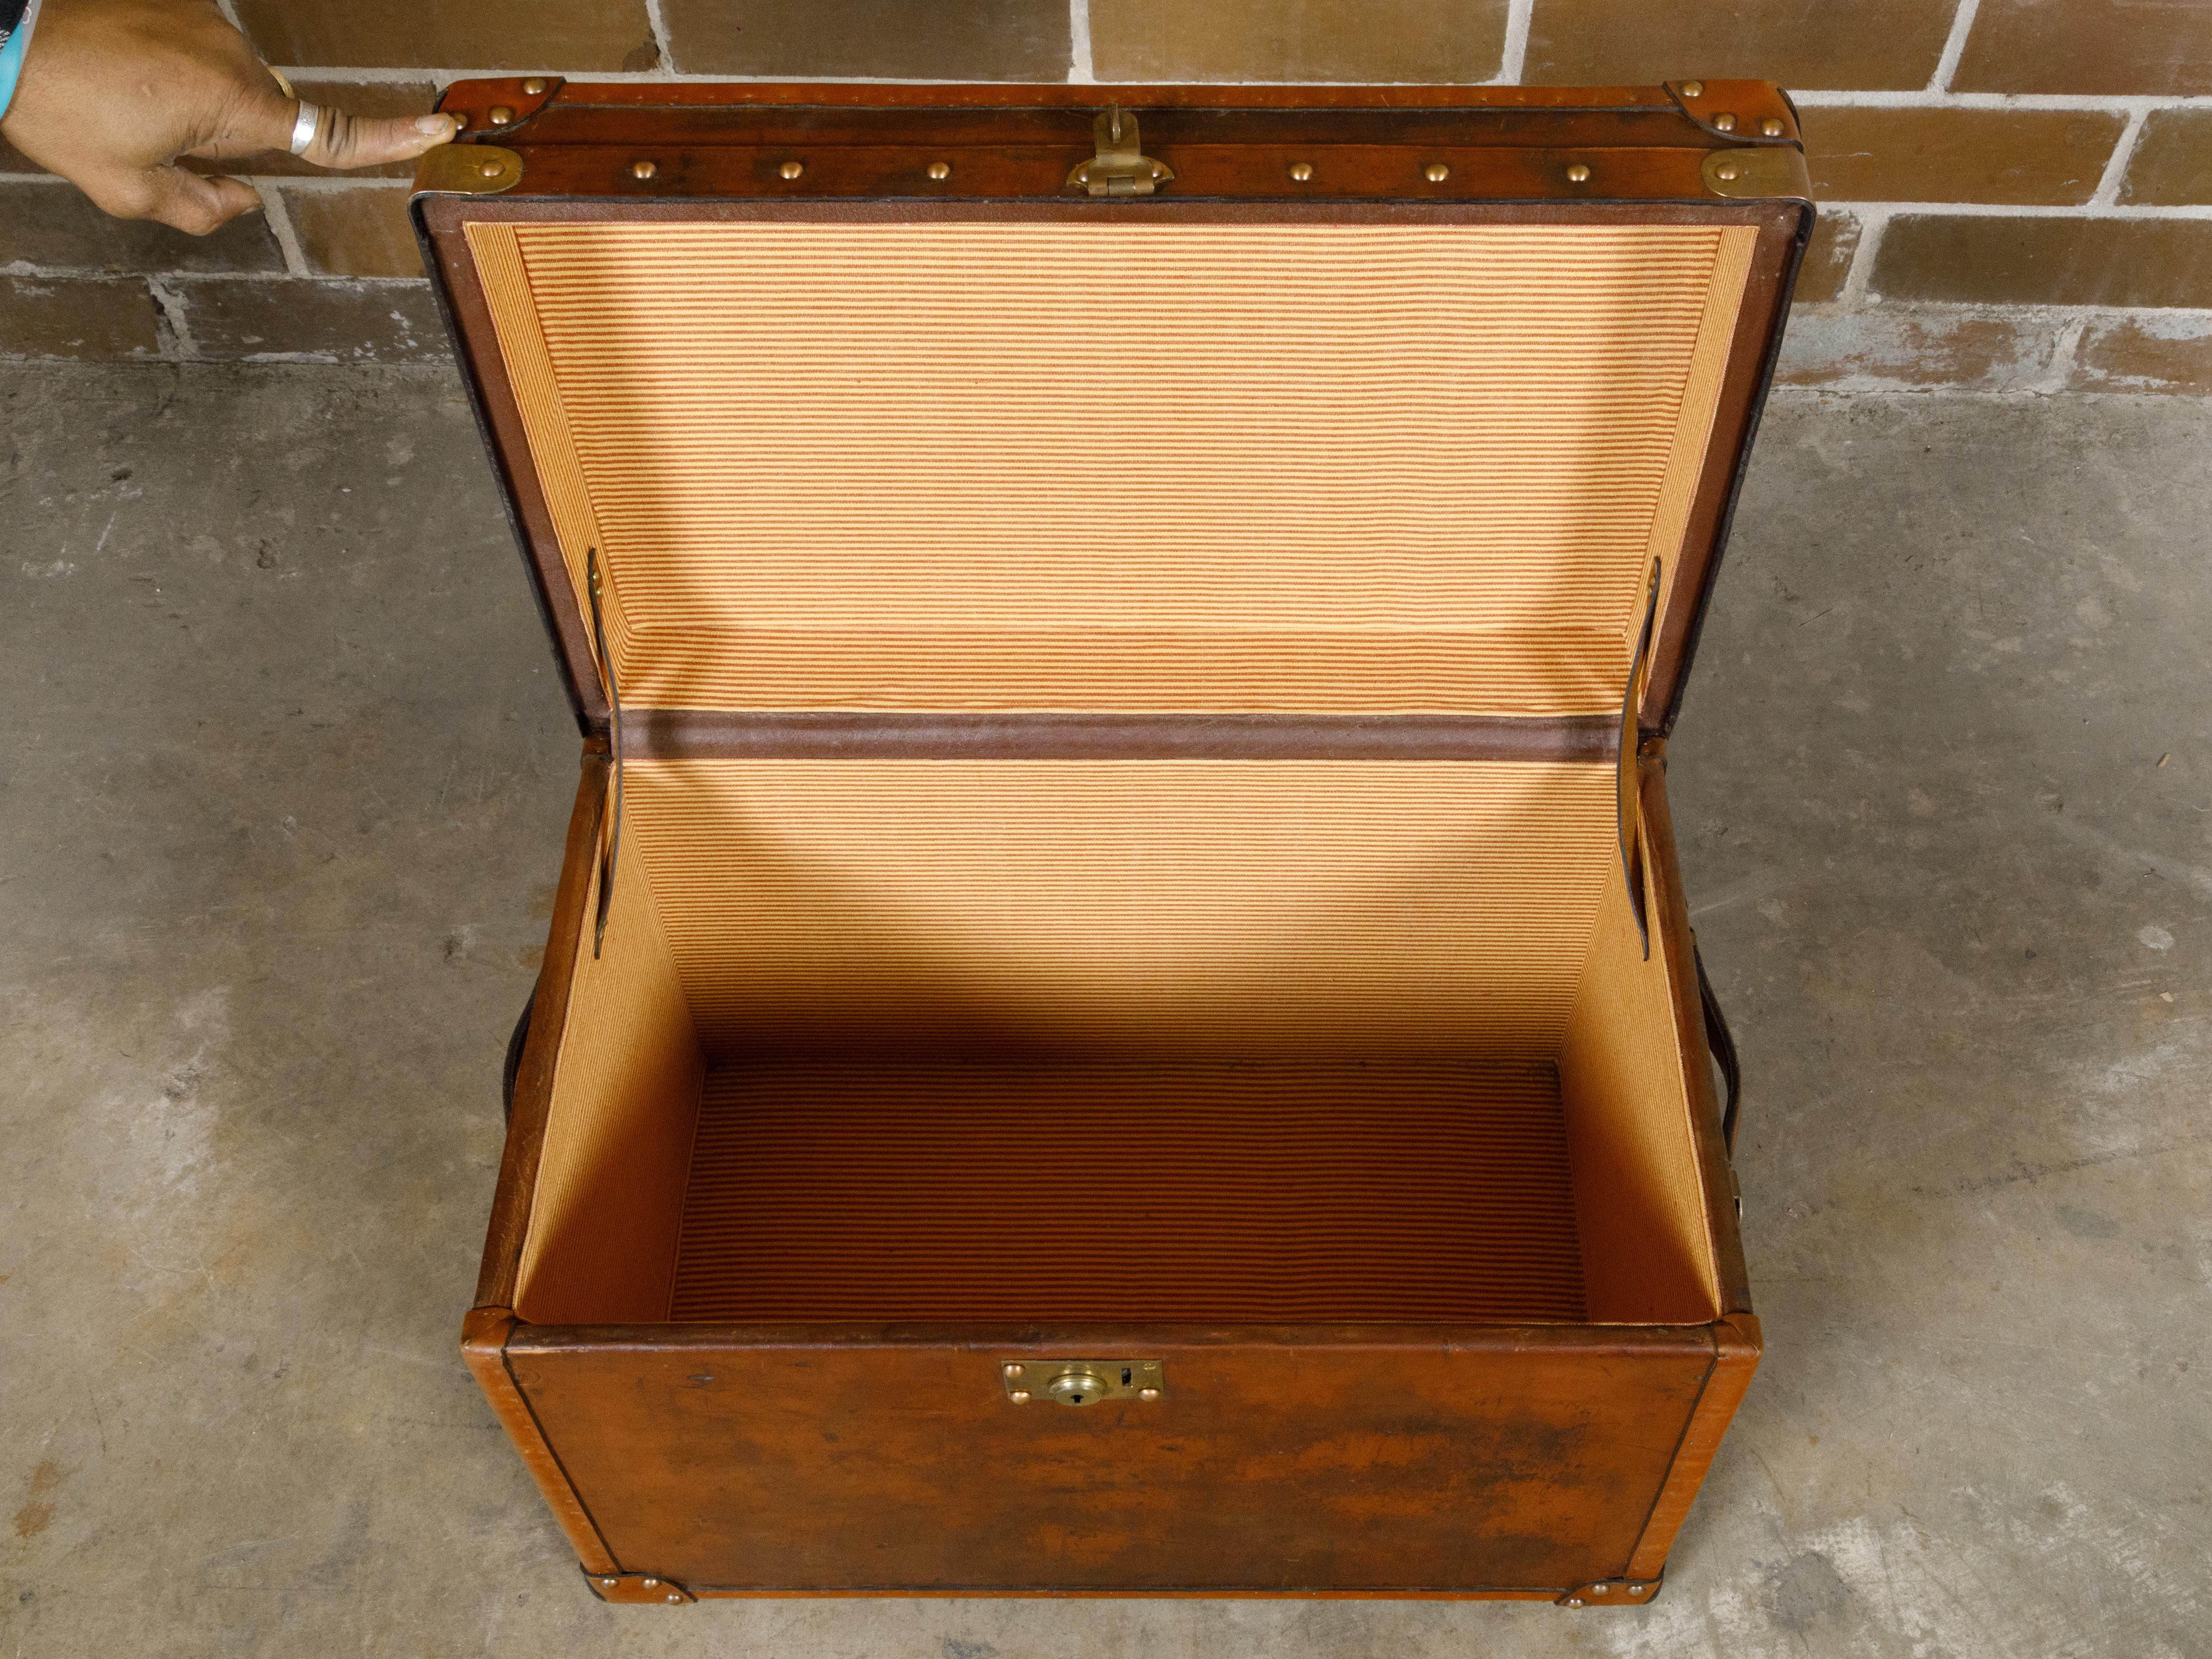 English Turn of the Century Leather Trunk with Brass Accents and Monogram, 1900s For Sale 5